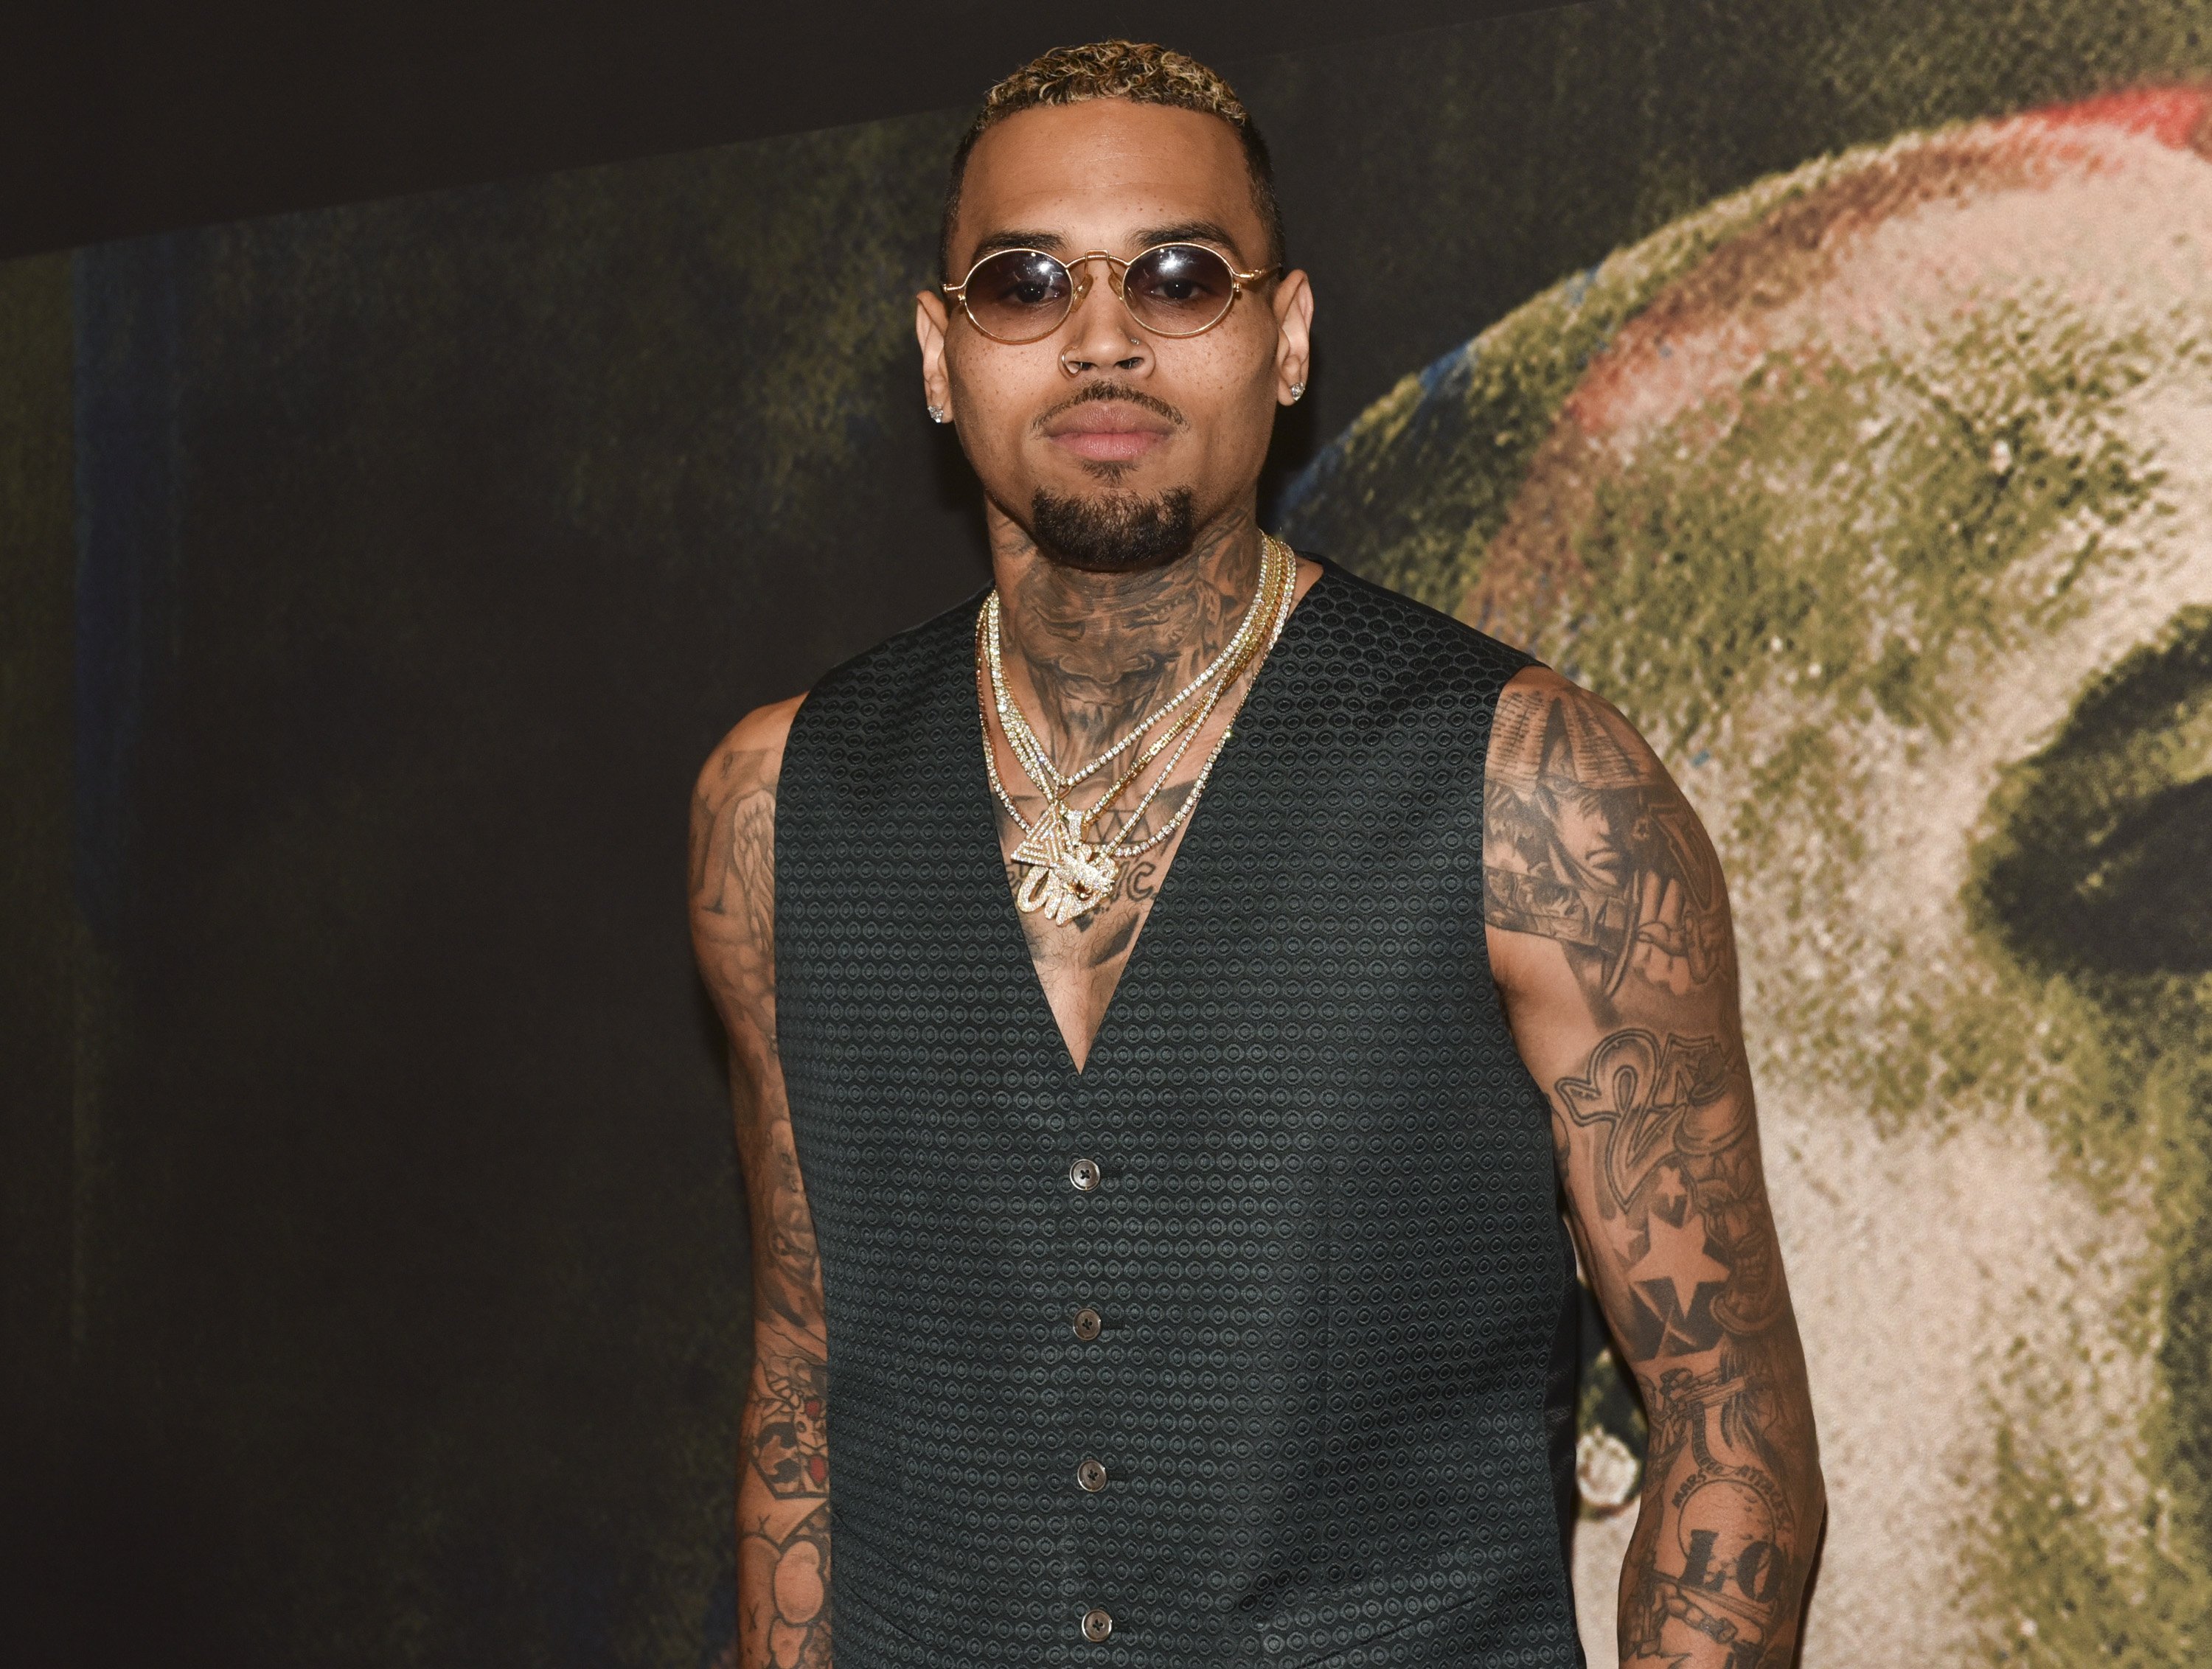 Chris Brown at the premiere of "Chris Brown: Welcome to My Life" at Regal LA Live Stadium 14 on June 6, 2017 in Los Angeles, California.| Source: Getty Images